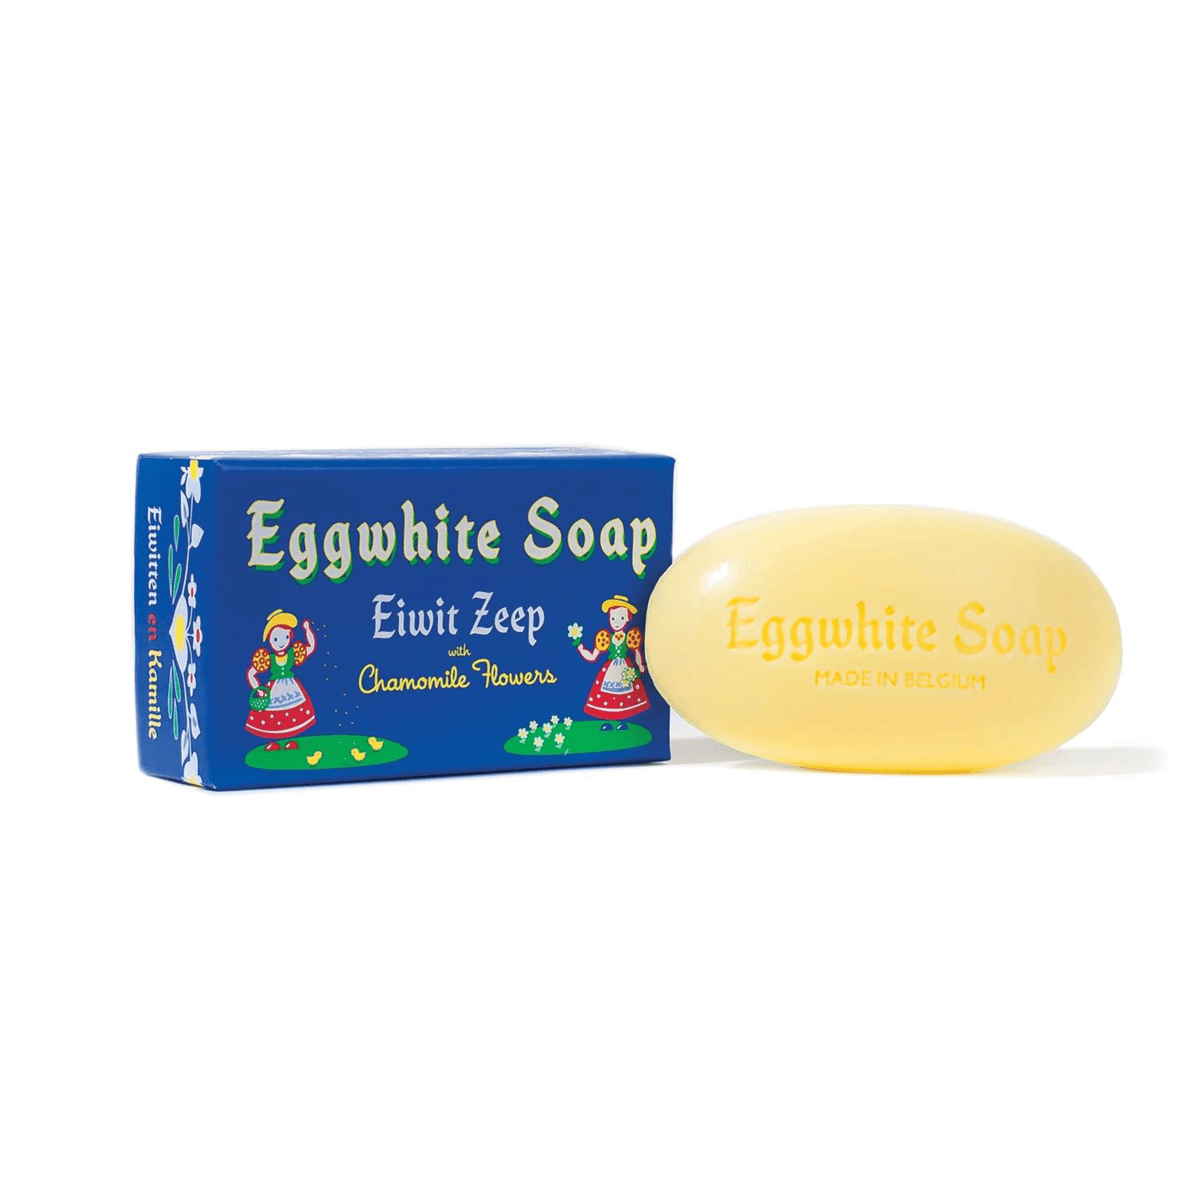 Primary Image of Egg White Soap For The Face